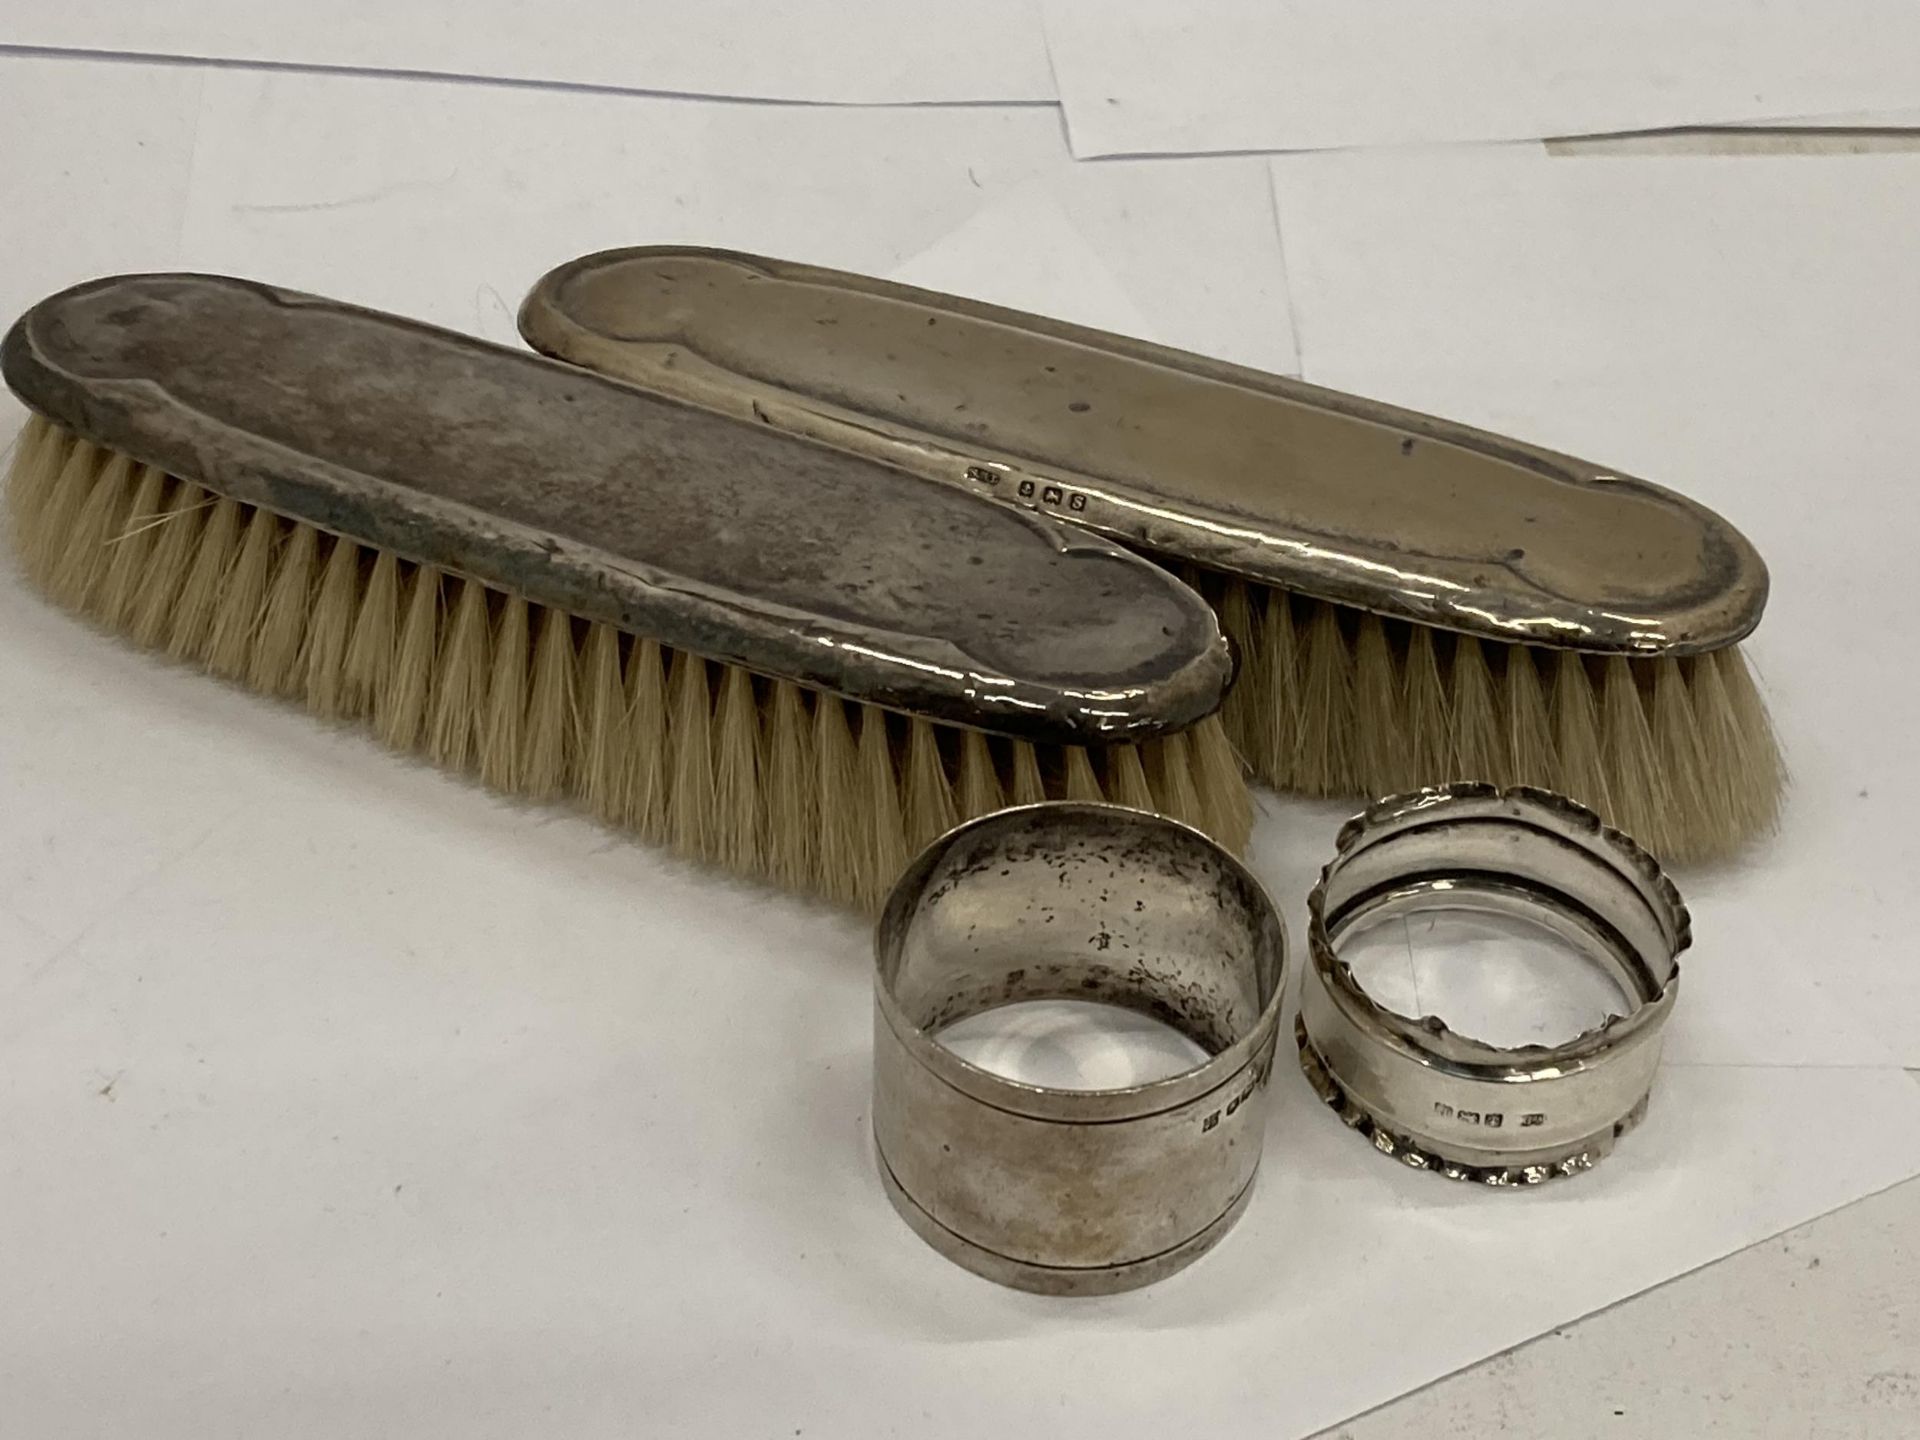 FOUR HALLMARKED SILVER ITEMS - TWO BRUSHES AND TWO NAPKIN RINGS